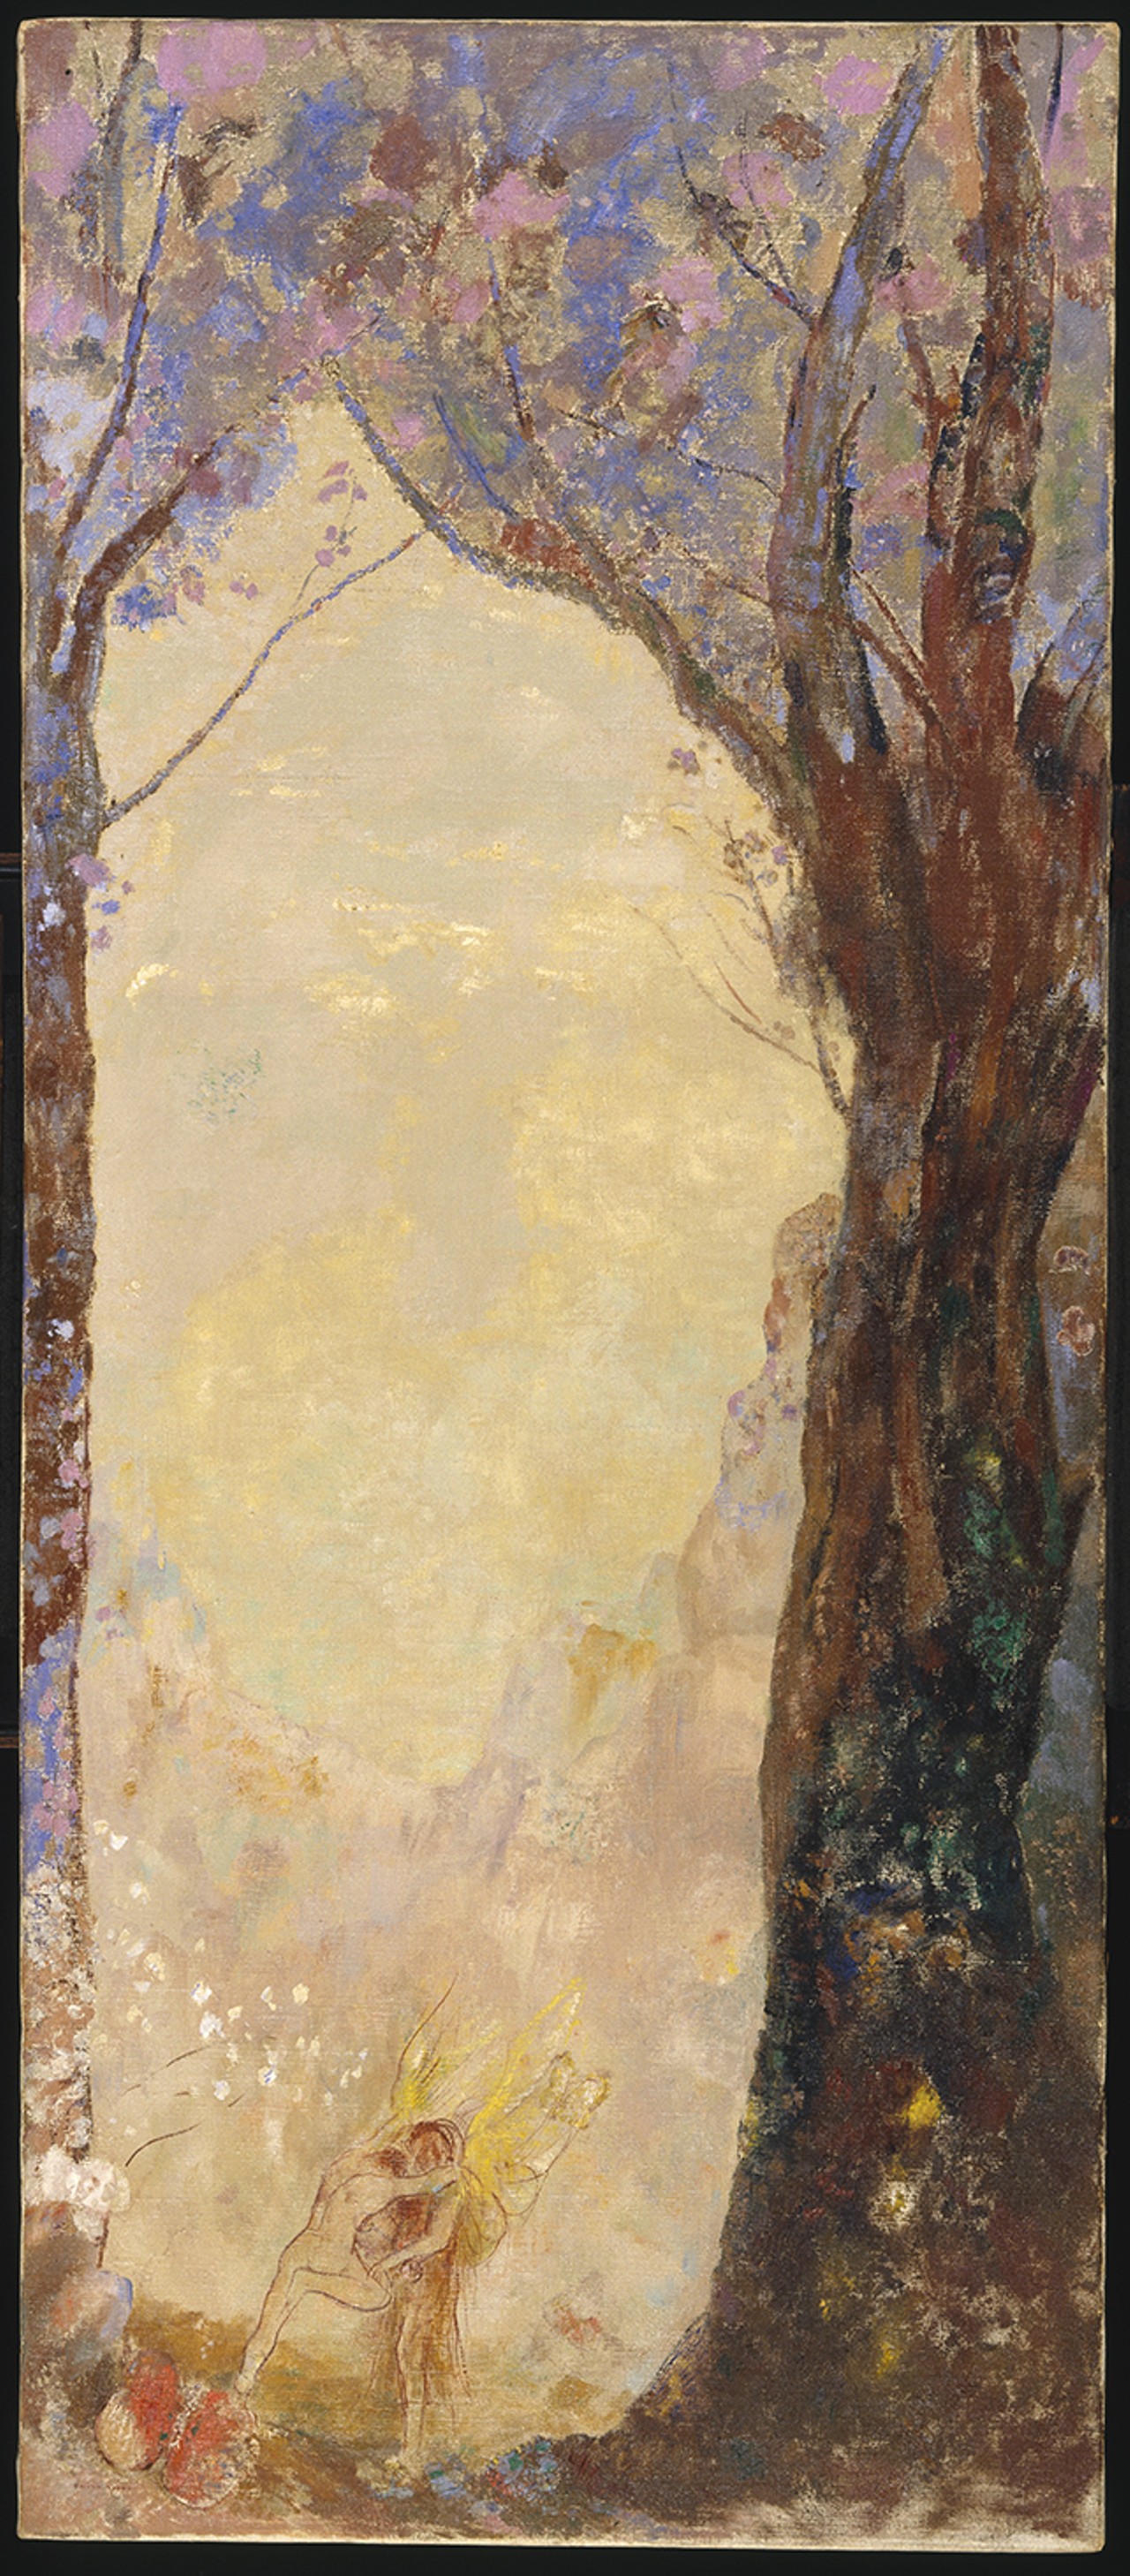 Odilon Redon (French, 1840&#150;1916). Jacob Wrestling with the Angel, circa 1905&#150;10. Oil on canvas, 56 1/2 x 24 1/2 in. (143.5 x 62.2 cm). Brooklyn Museum, Bequest of Alexander M. Bing, 60.31. (Photo: Brooklyn Museum)